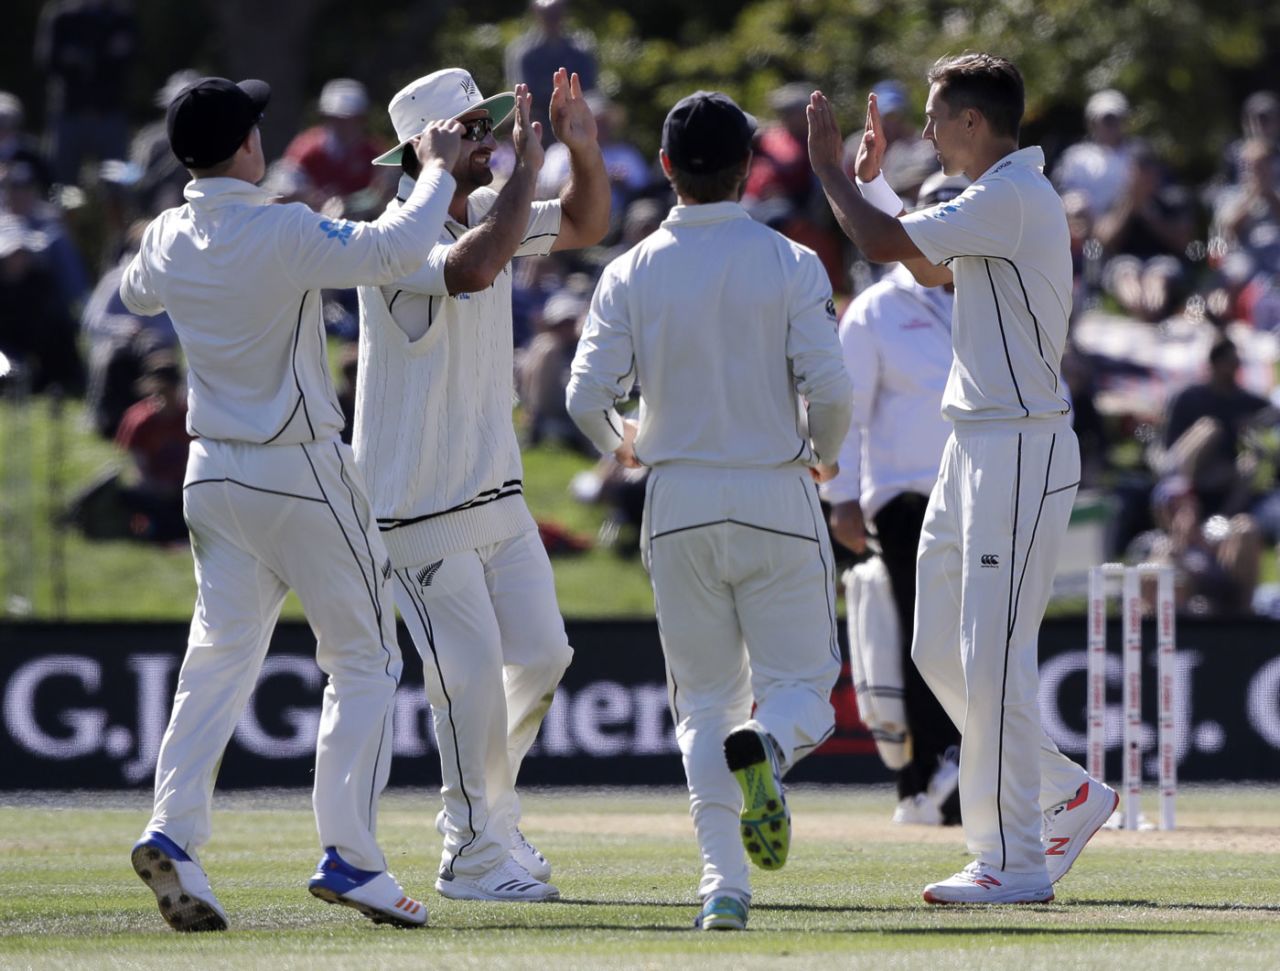 Trent Boult removed Alastair Cook for the fourth time in the series, New Zealand v England, 2nd Test, Christchurch, 3rd day, April 1, 2018